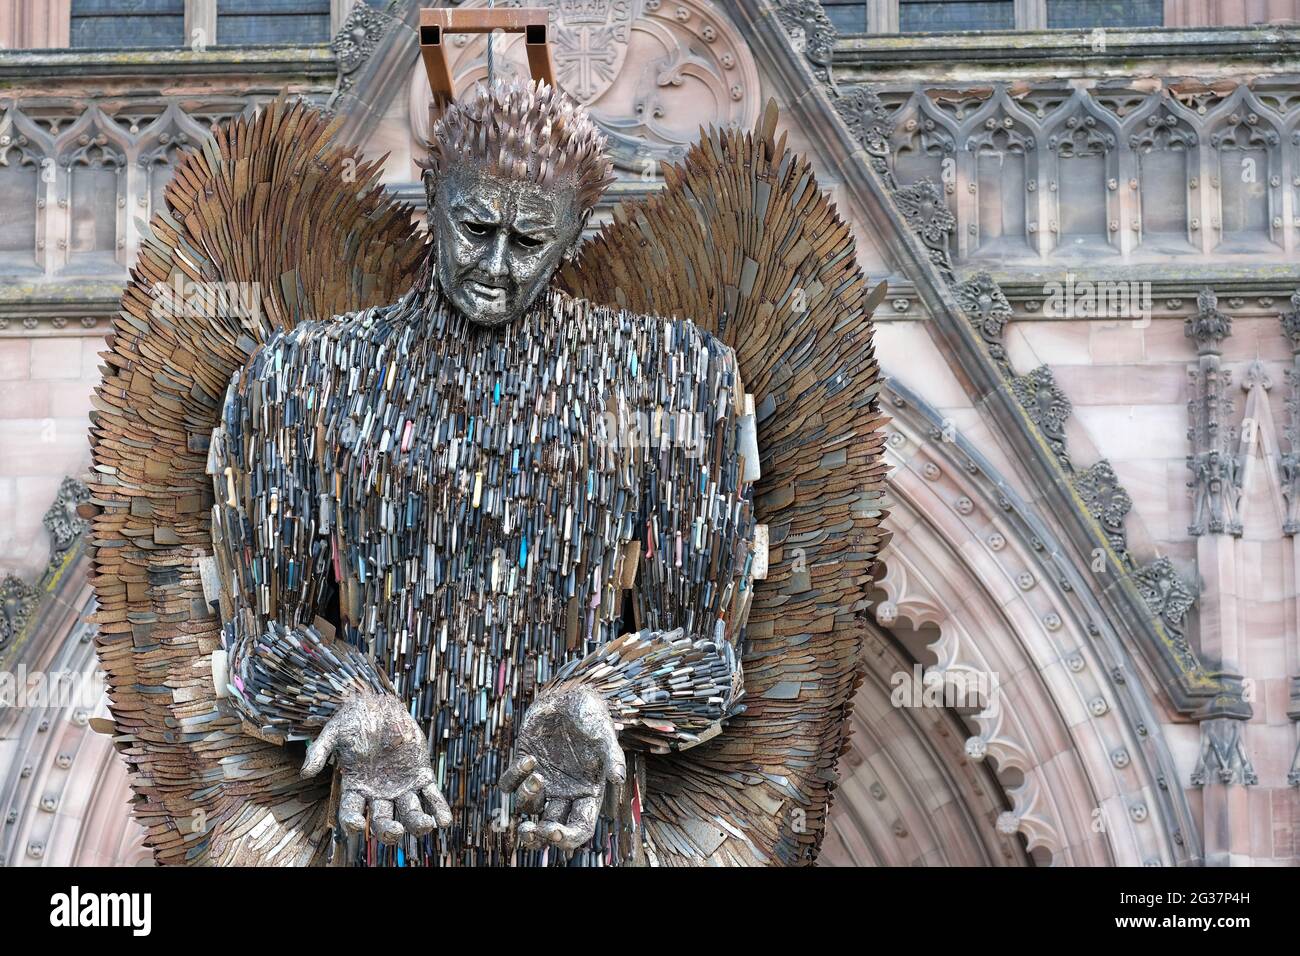 Hereford, Herefordshire, UK - Monday 14th June 2021 - The Knife Angel statue aloft outside the Cathedral supported by a frame - the 27ft tall 3.5 ton statue is made out of 100,000 confiscated knives and was created by sculptor Alfie Bradley. The Knife Angel statue raises awareness of the impact of knife crime and will be displayed outside Hereford Cathedral until 12th July 2021. Photo Steven May / Alamy Live News Stock Photo